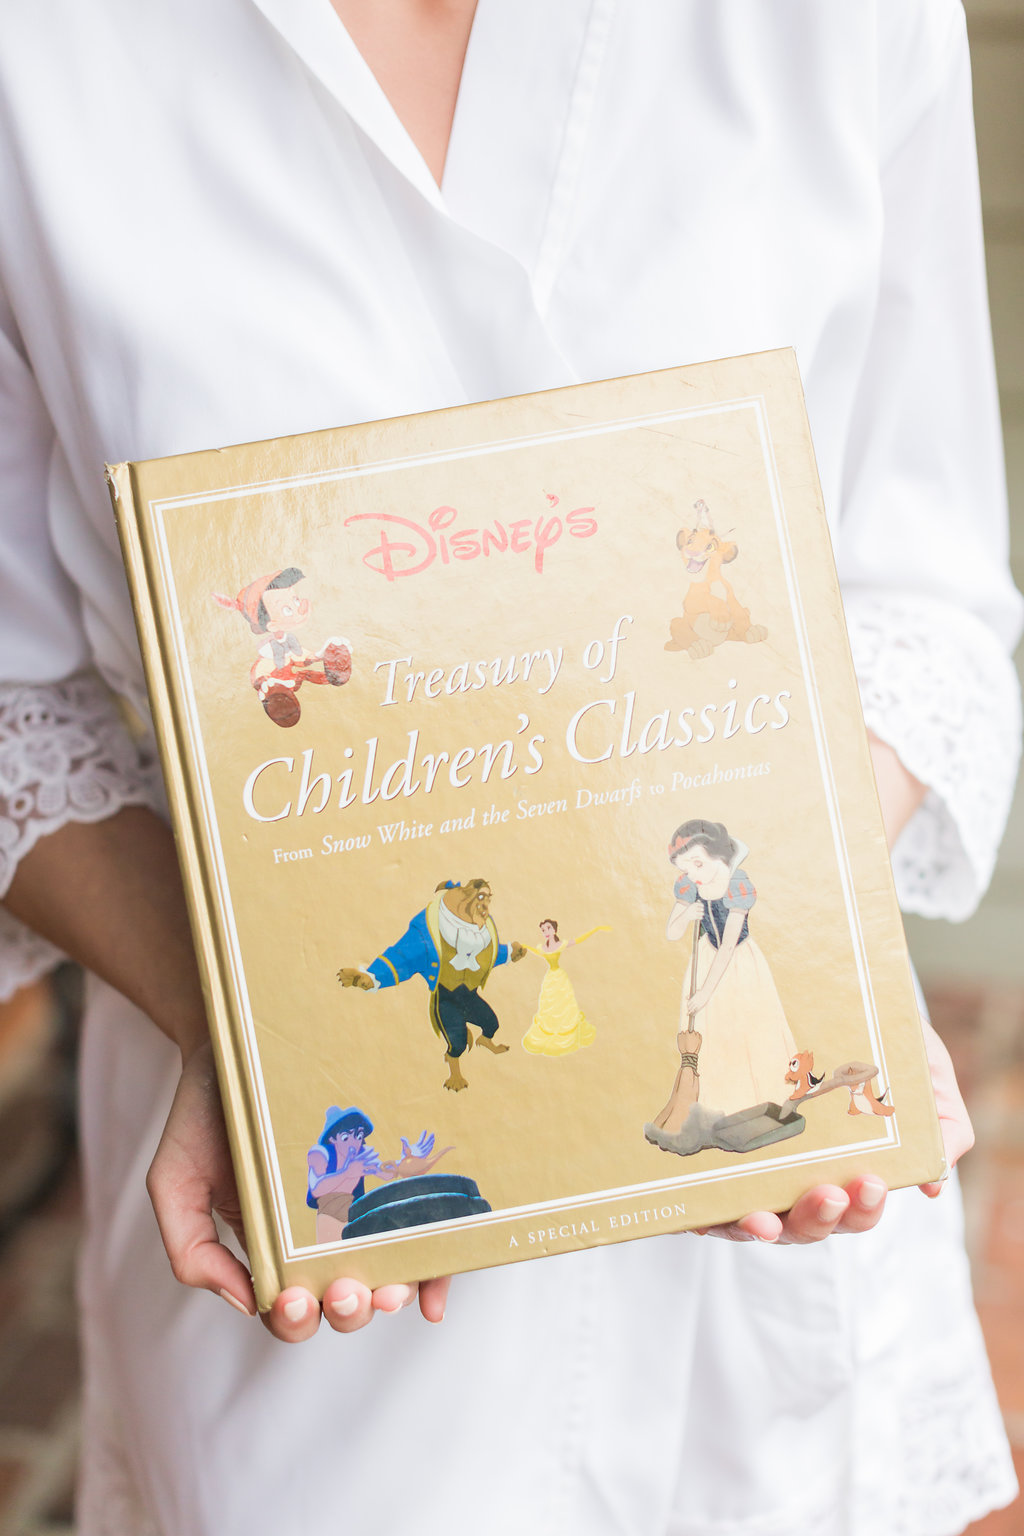 The Disney loving bride was gifted a limited edition Disney children's book collection